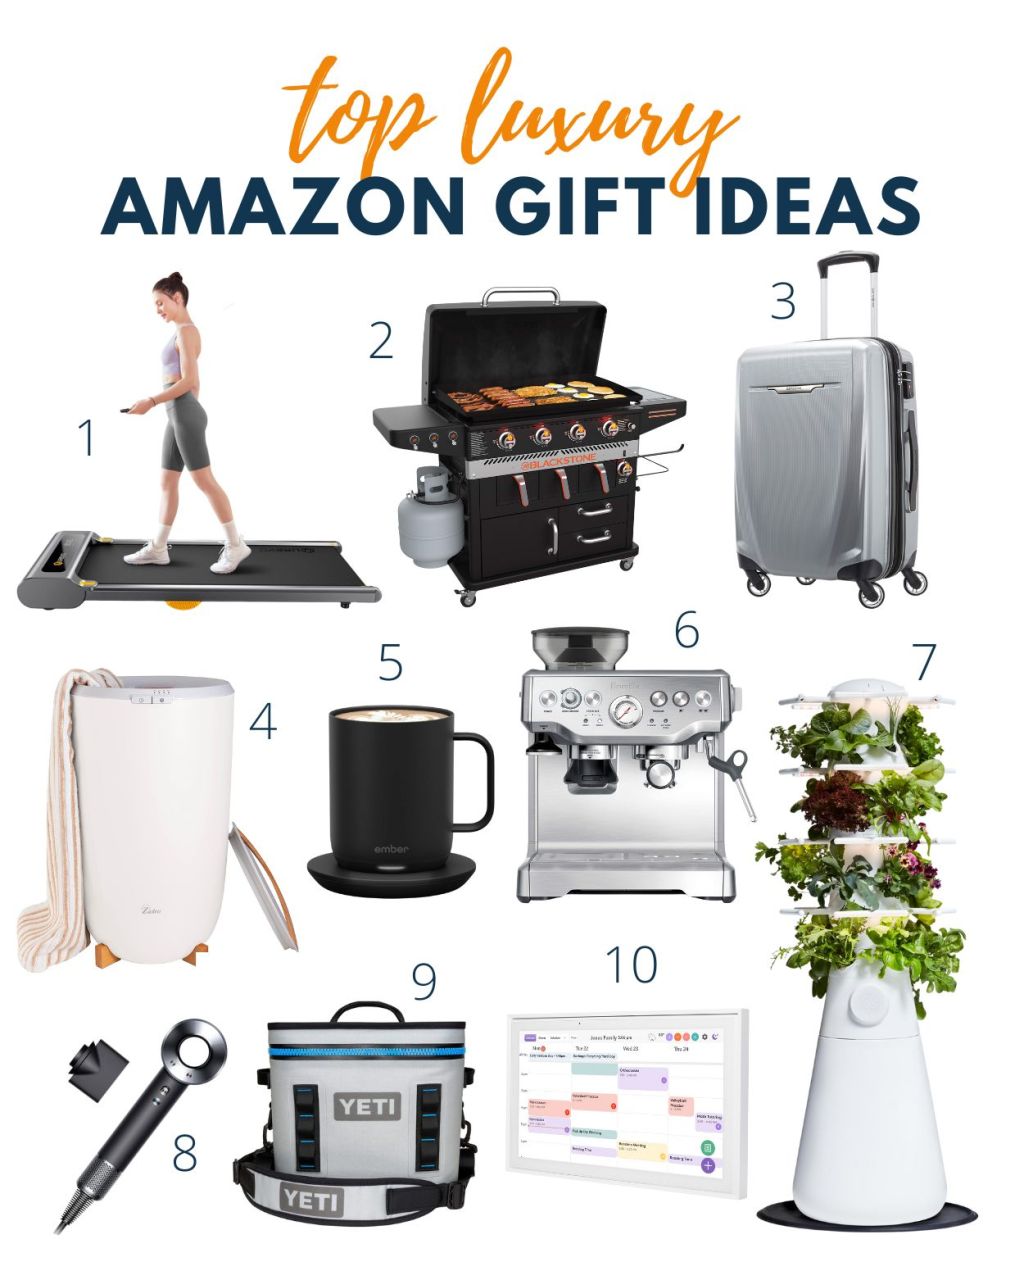 graphic showing 10 luxury gift ideas